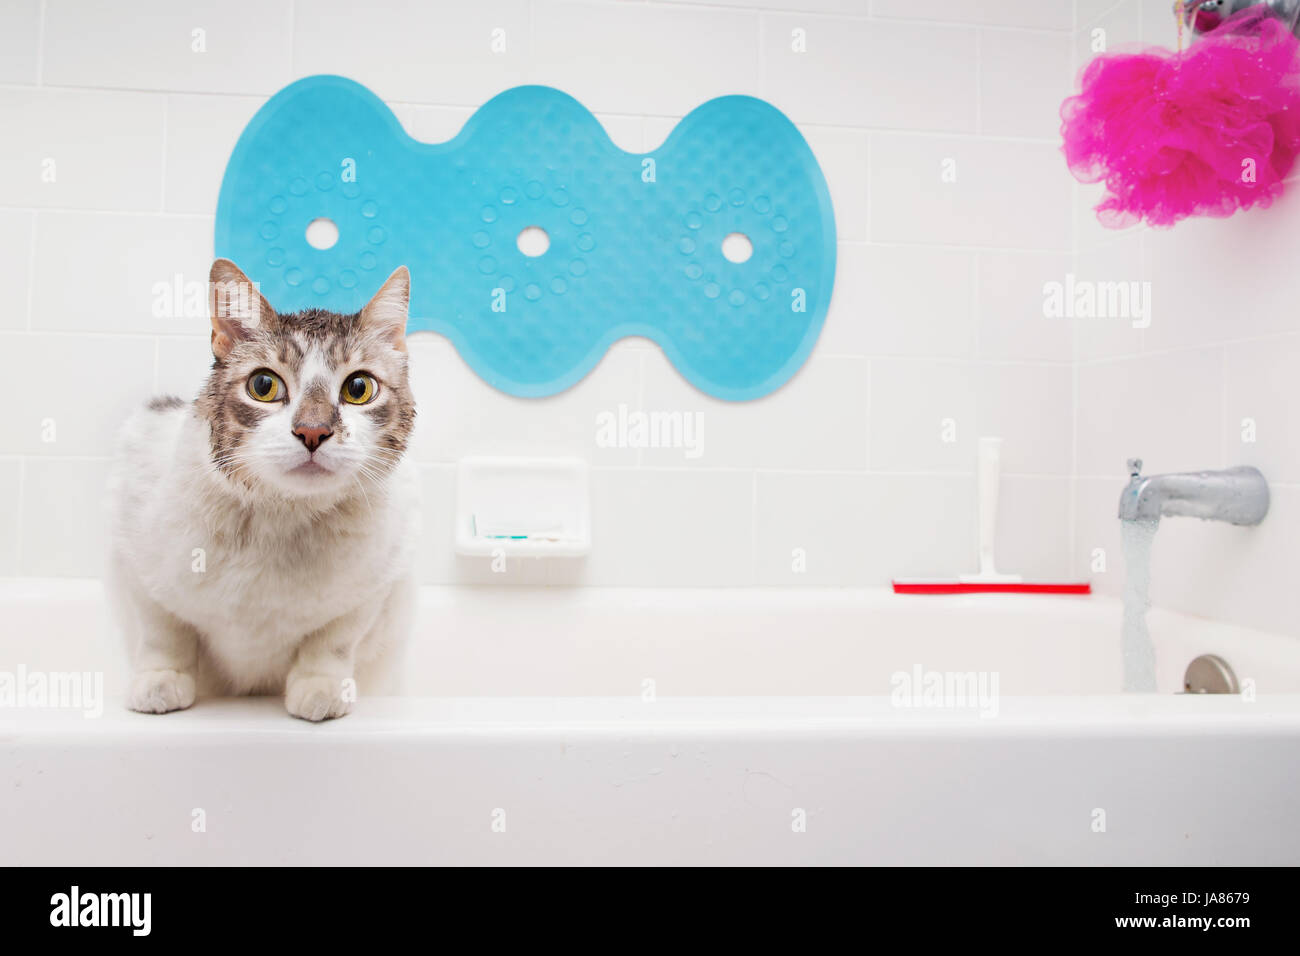 White cat in bathtub with cautious expression. Stock Photo